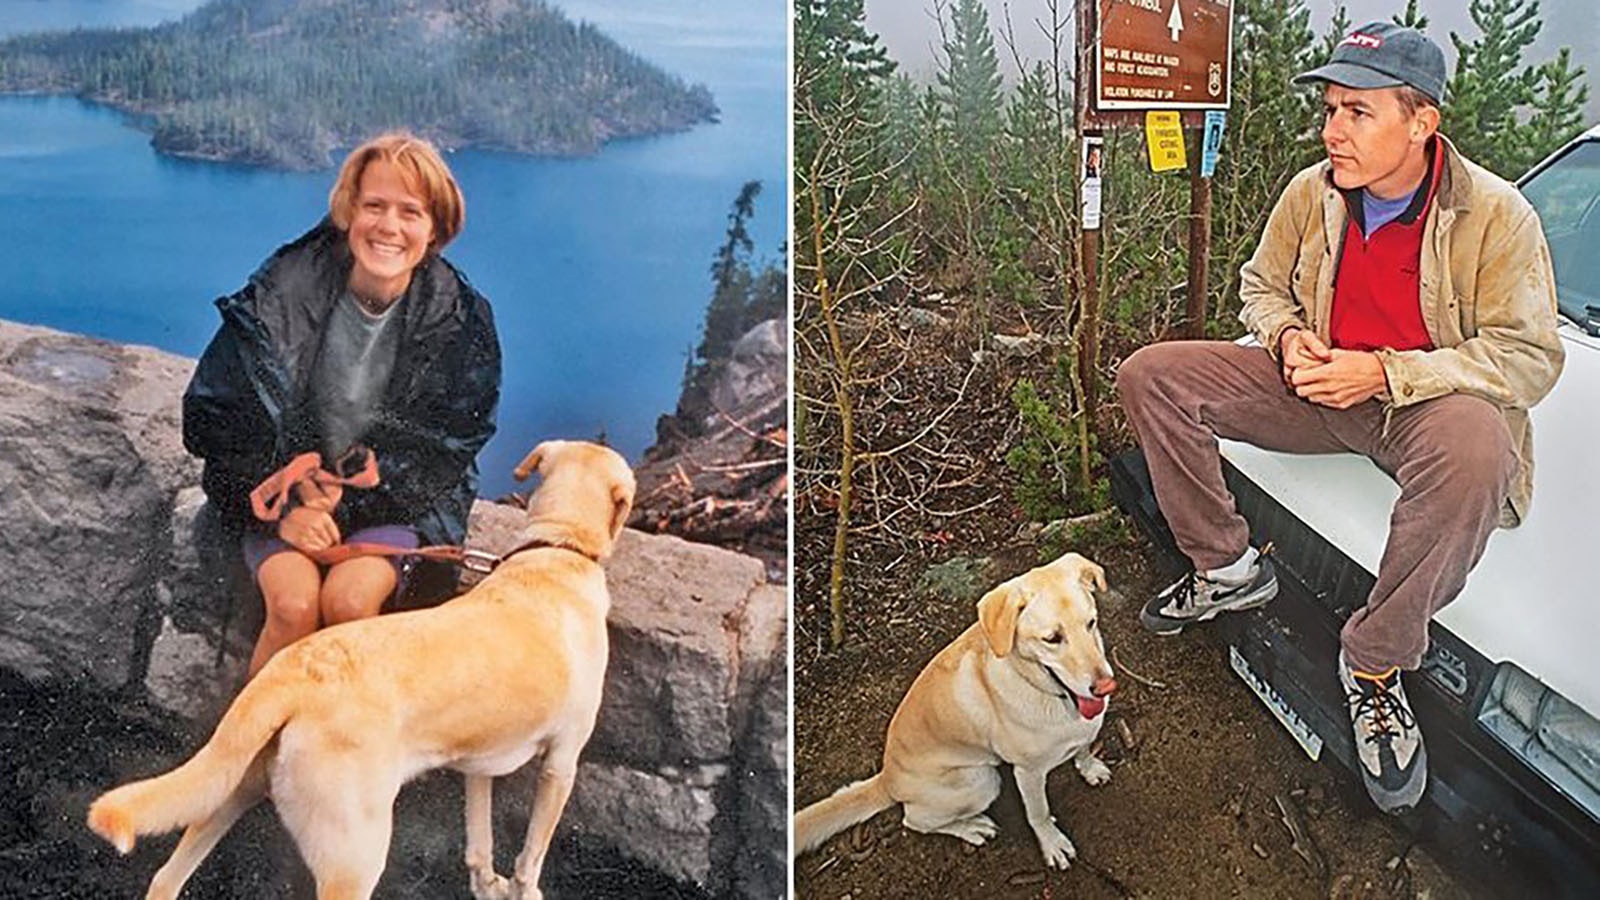 Amy Wroe Bechtel and her dog Jonz at Crater Lake. The day she went missing, Jonz was with Steve, right.